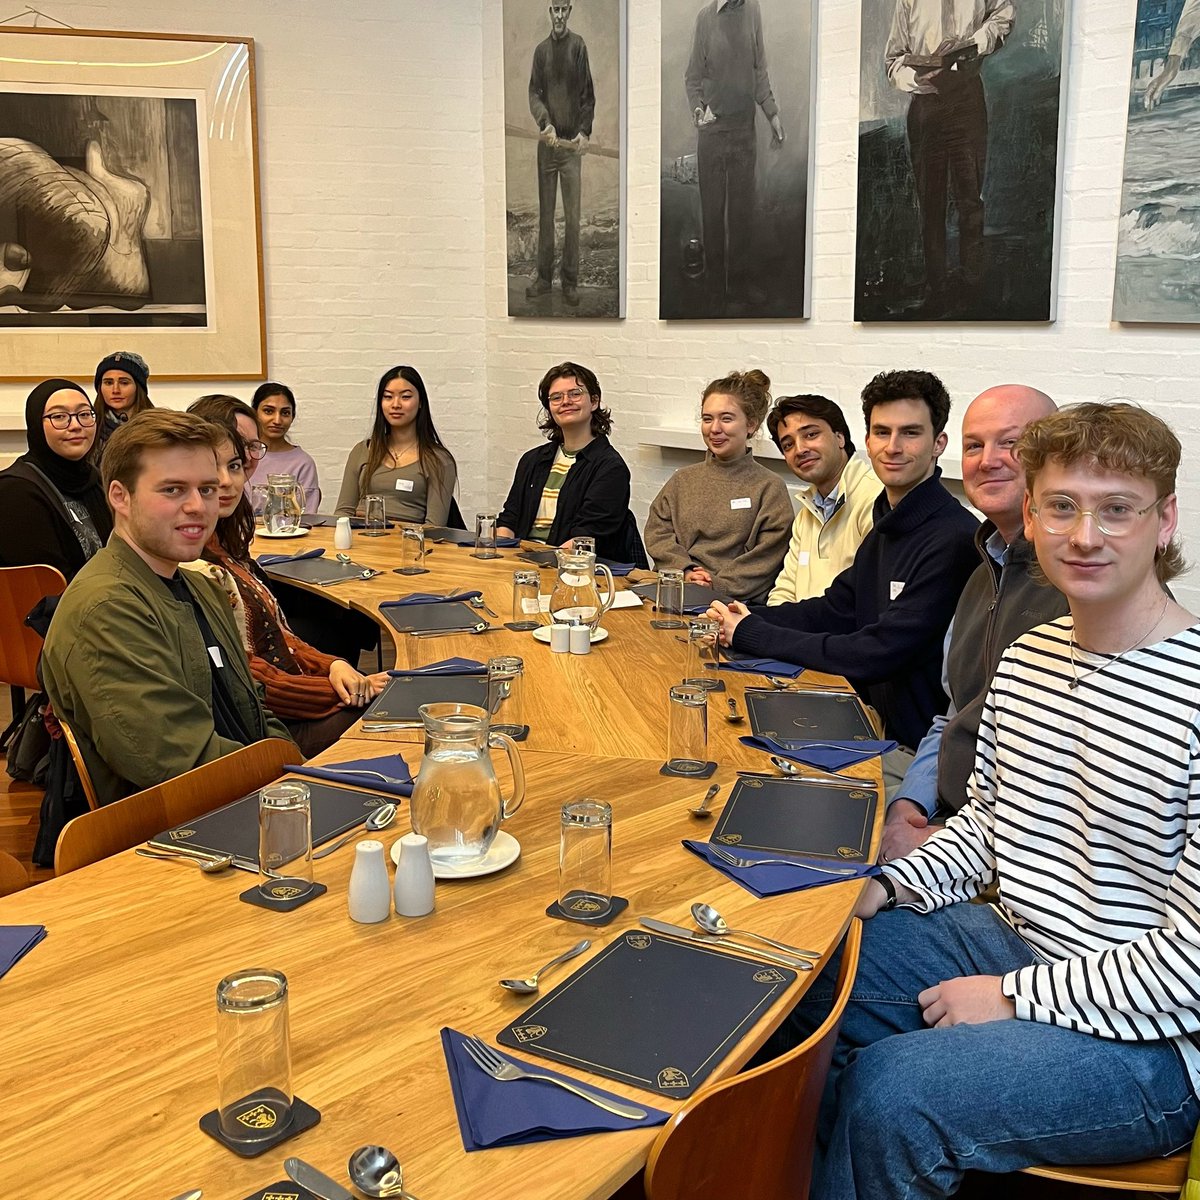 Great to welcome students and staff to Trevs for the Global Week Interfaith Lunch organised in collaboration with the Durham Interfaith Students Network and Durham University Chaplaincy Network! #TrevelyanCollege #explore #community #interfaith #DUGlobalWeek